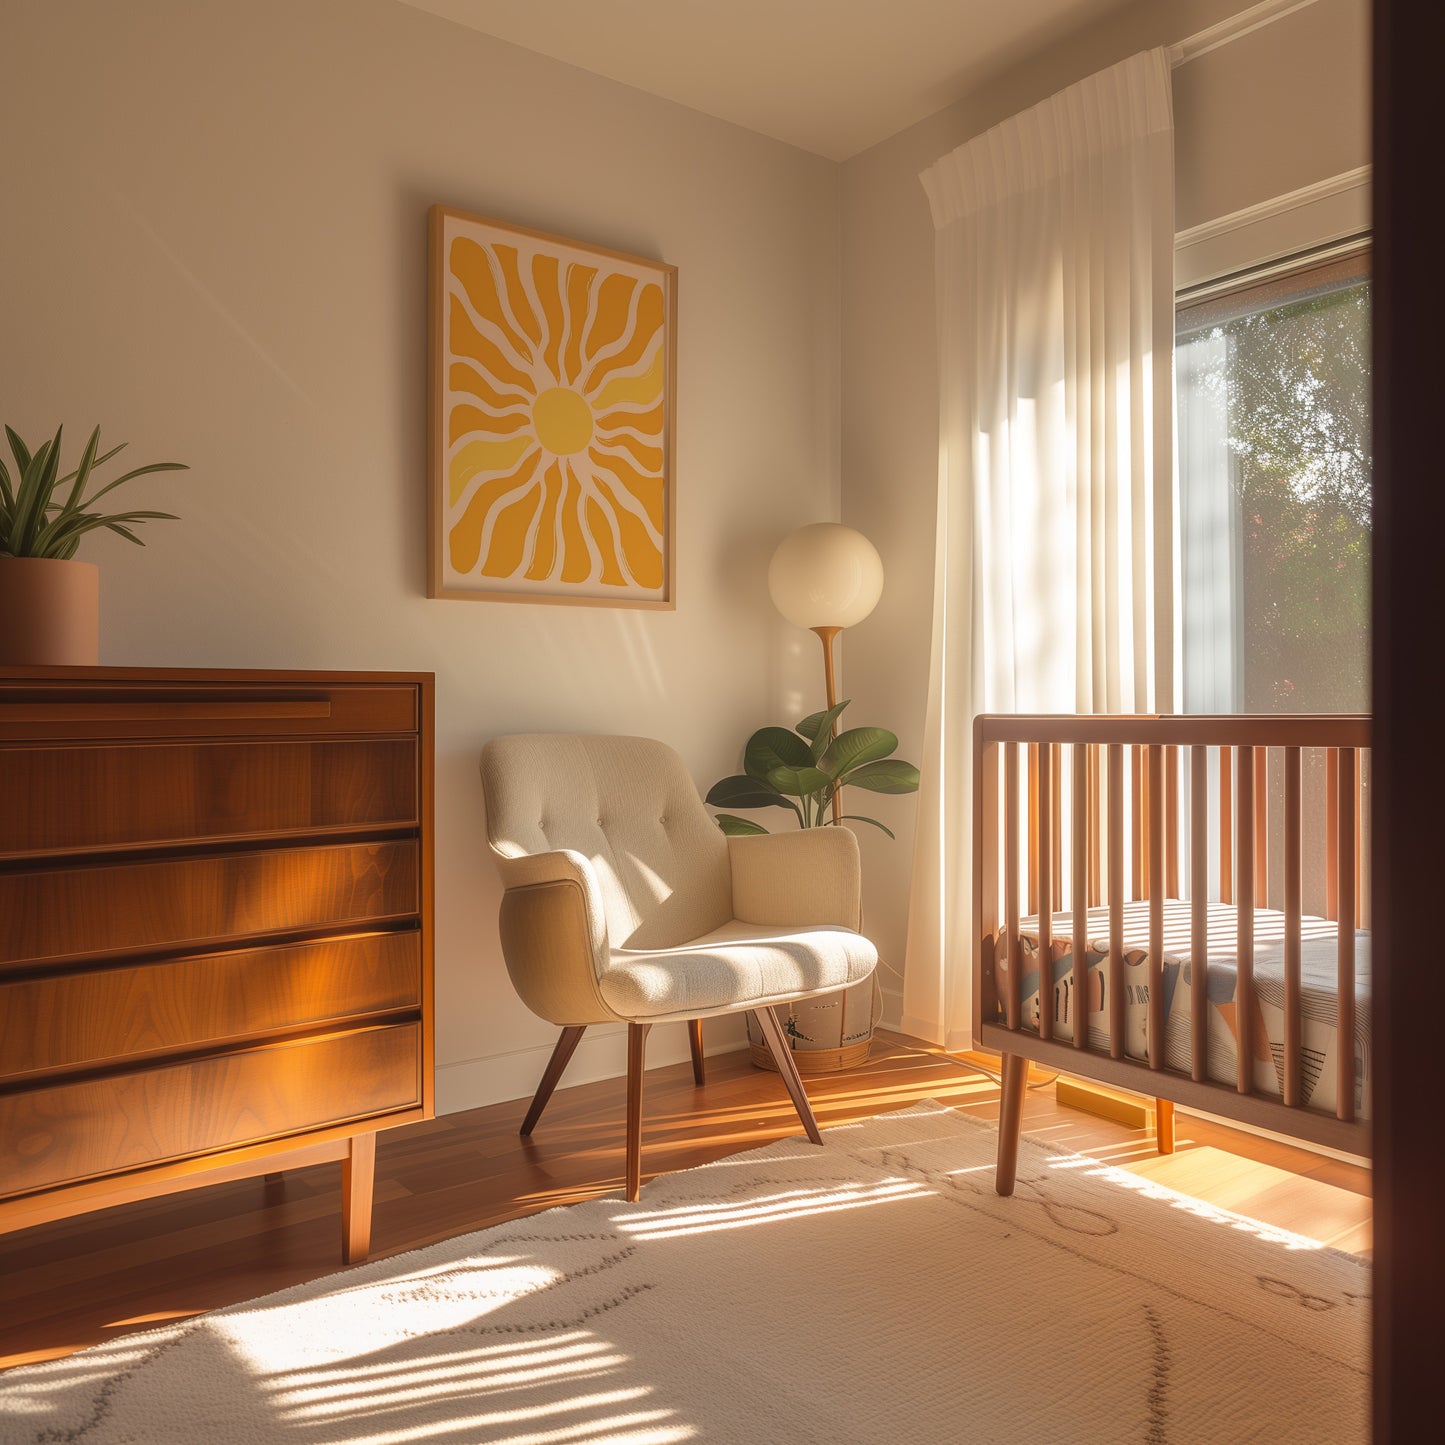 Cozy nursery room with a crib, armchair, and warm sunlight filtering through the window.